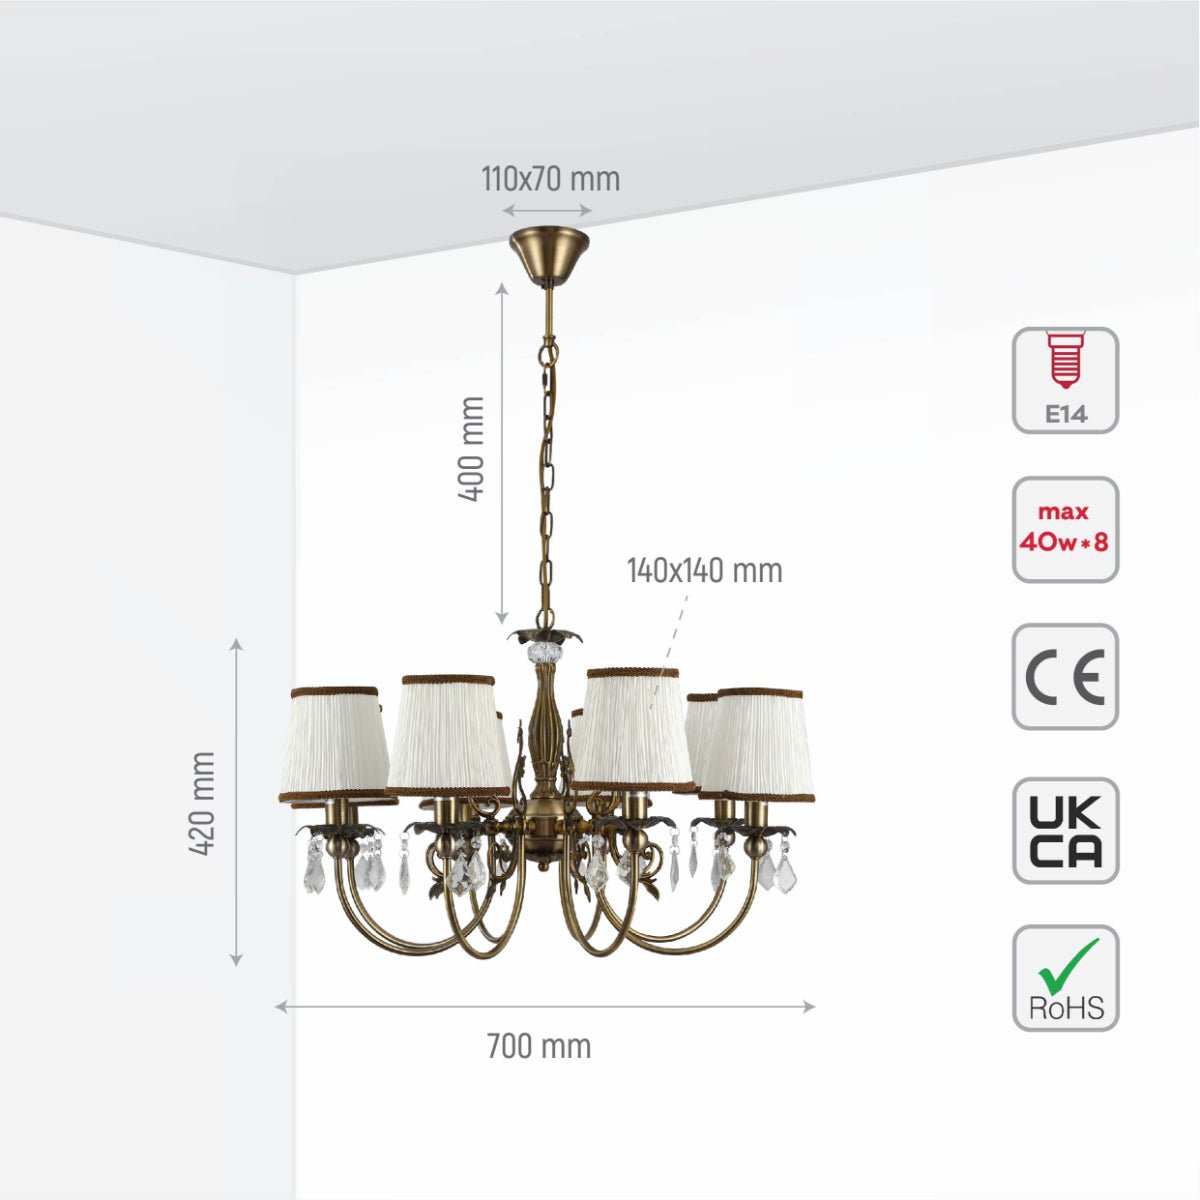 Size and specs of Antique Brass Finishing Metal Body Off White Shade Candle Vintage Crystal Ceiling Light with E14 | TEKLED 156-18205